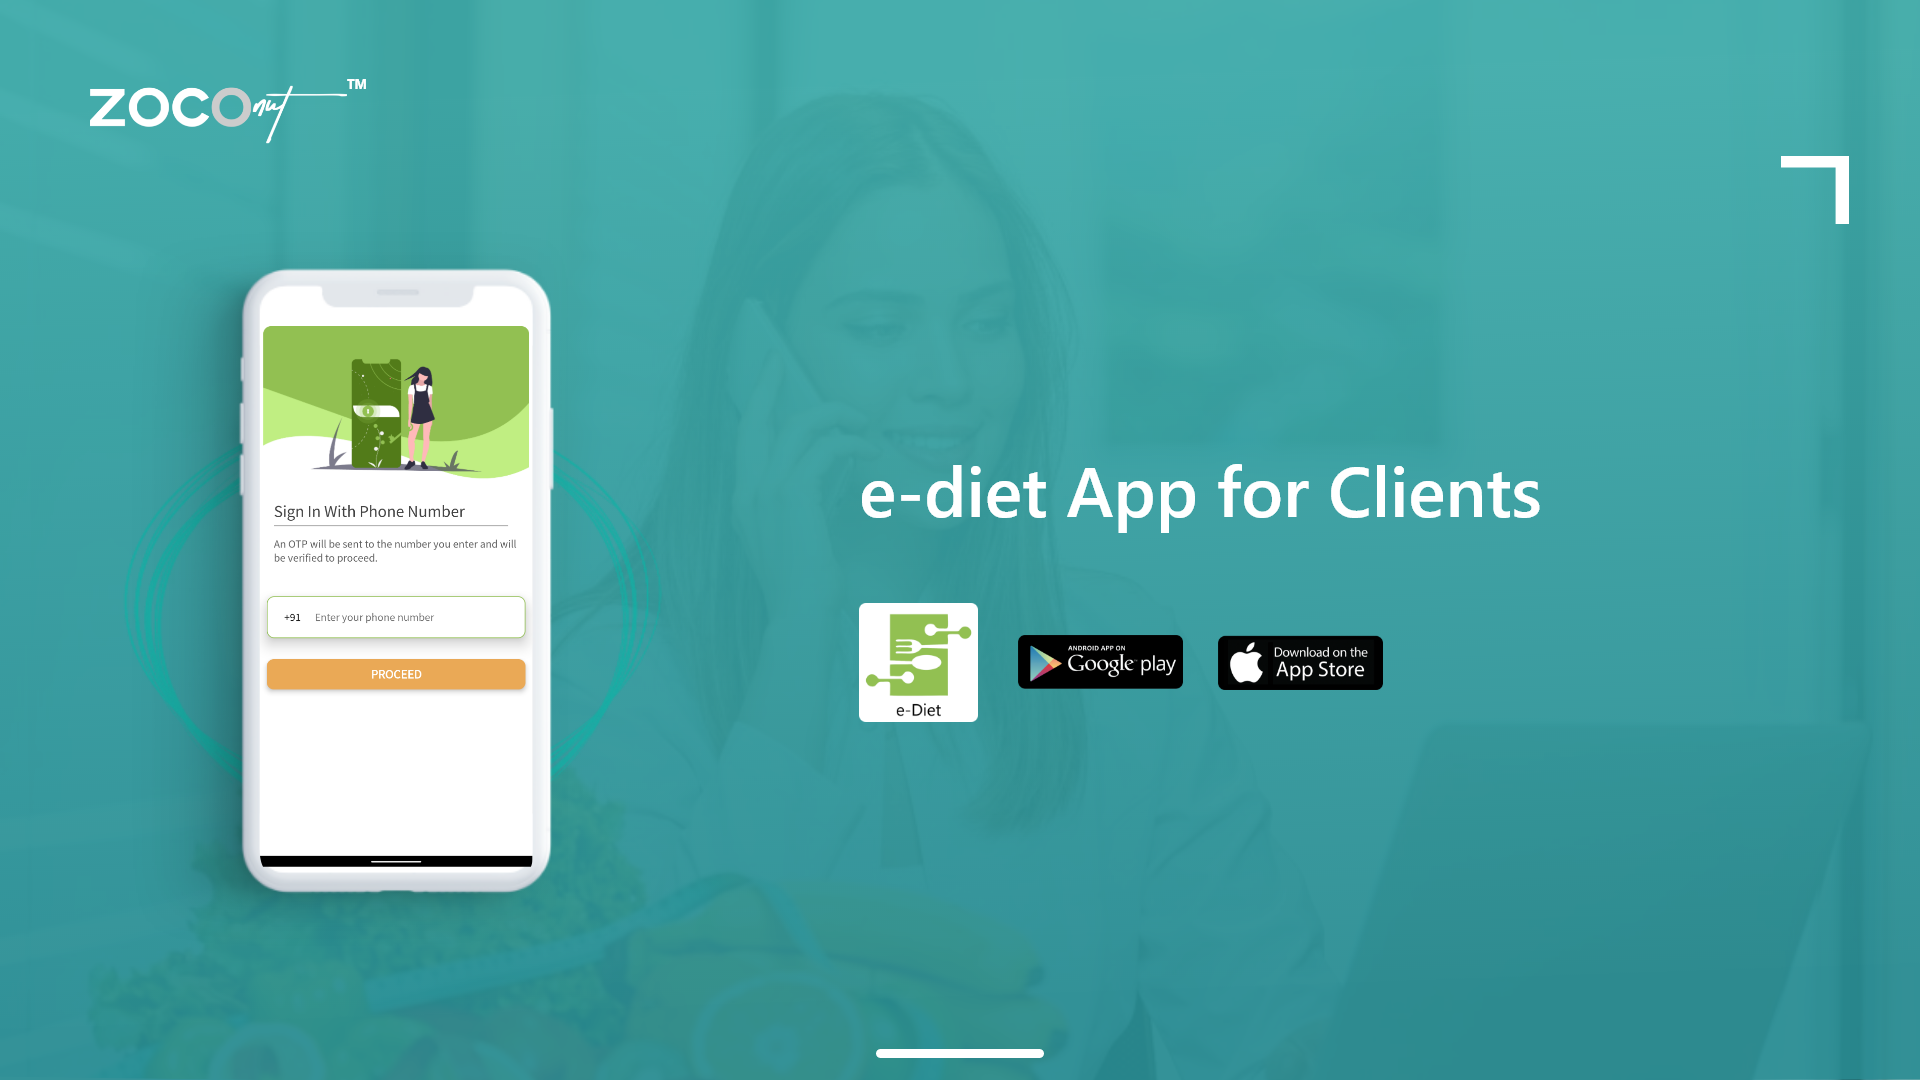 Offer Outstanding Care And Experience To Your Clients With eDiet App